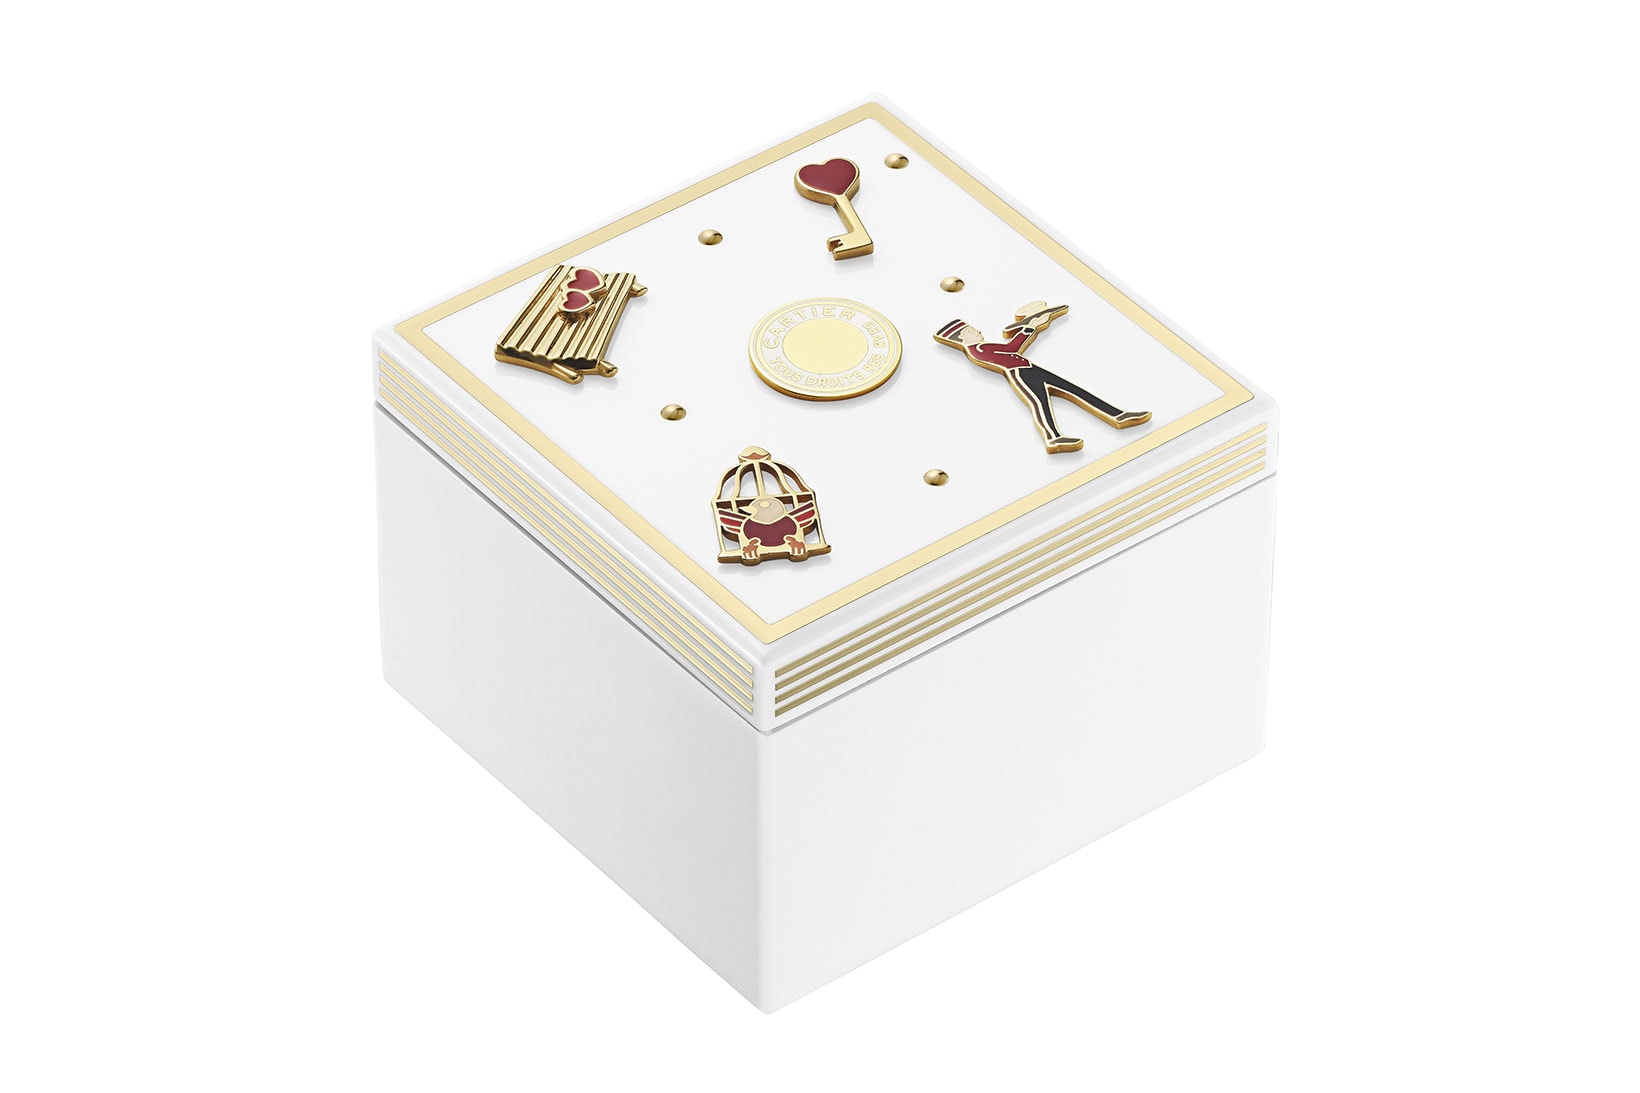 cartier luxury home objects decor collection holiday christmas diabolo music box